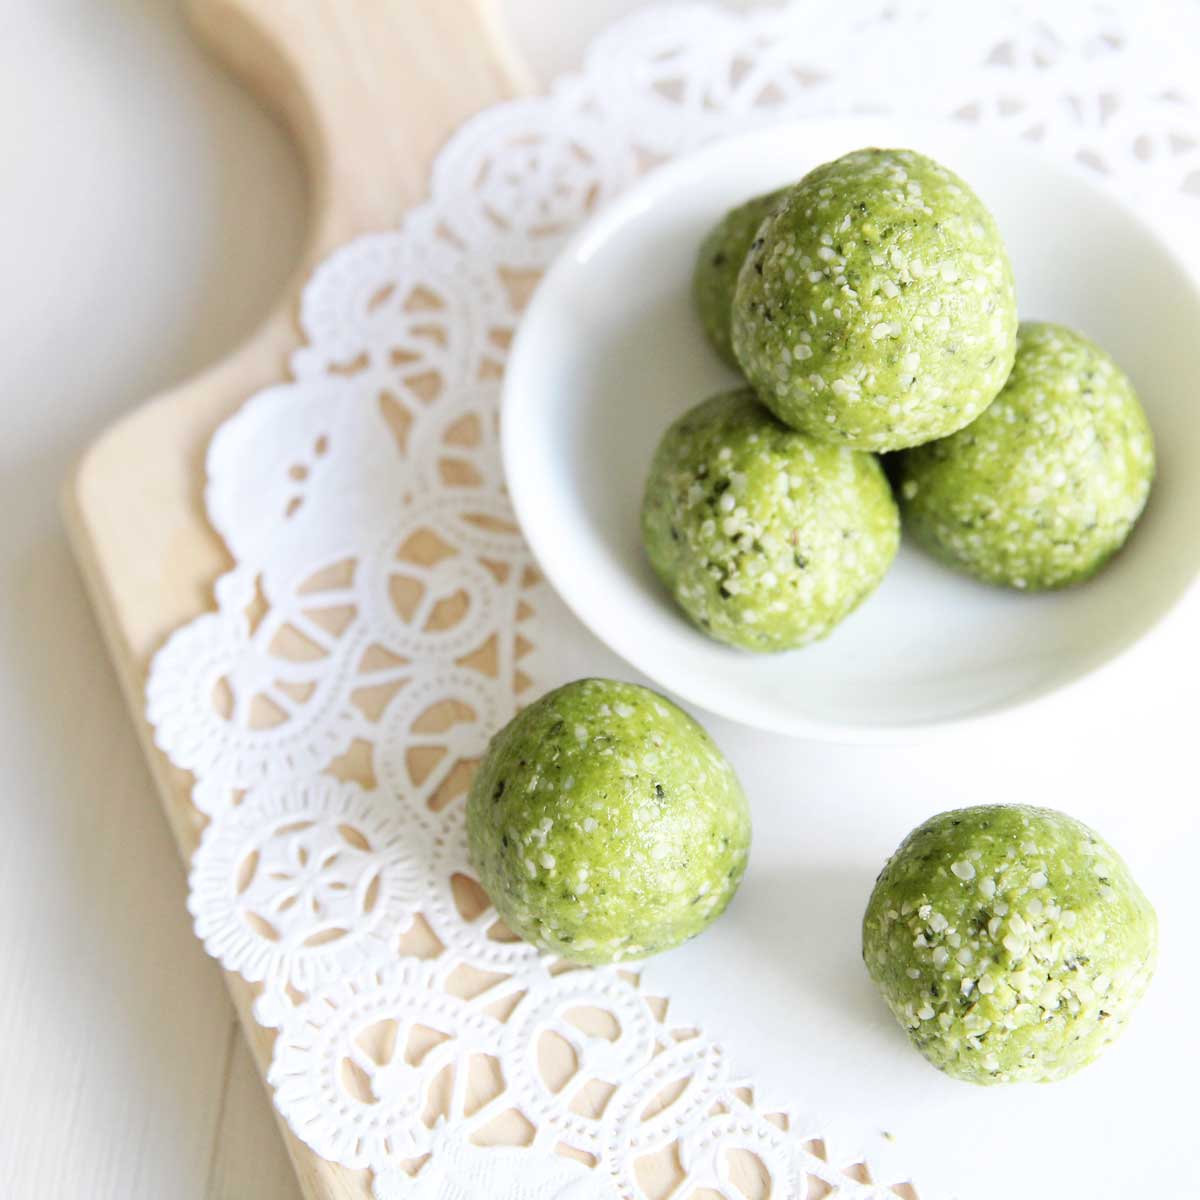 Power Packed Matcha Latte Protein Balls Recipe with Collagen Peptides - Zucchini Flatbread